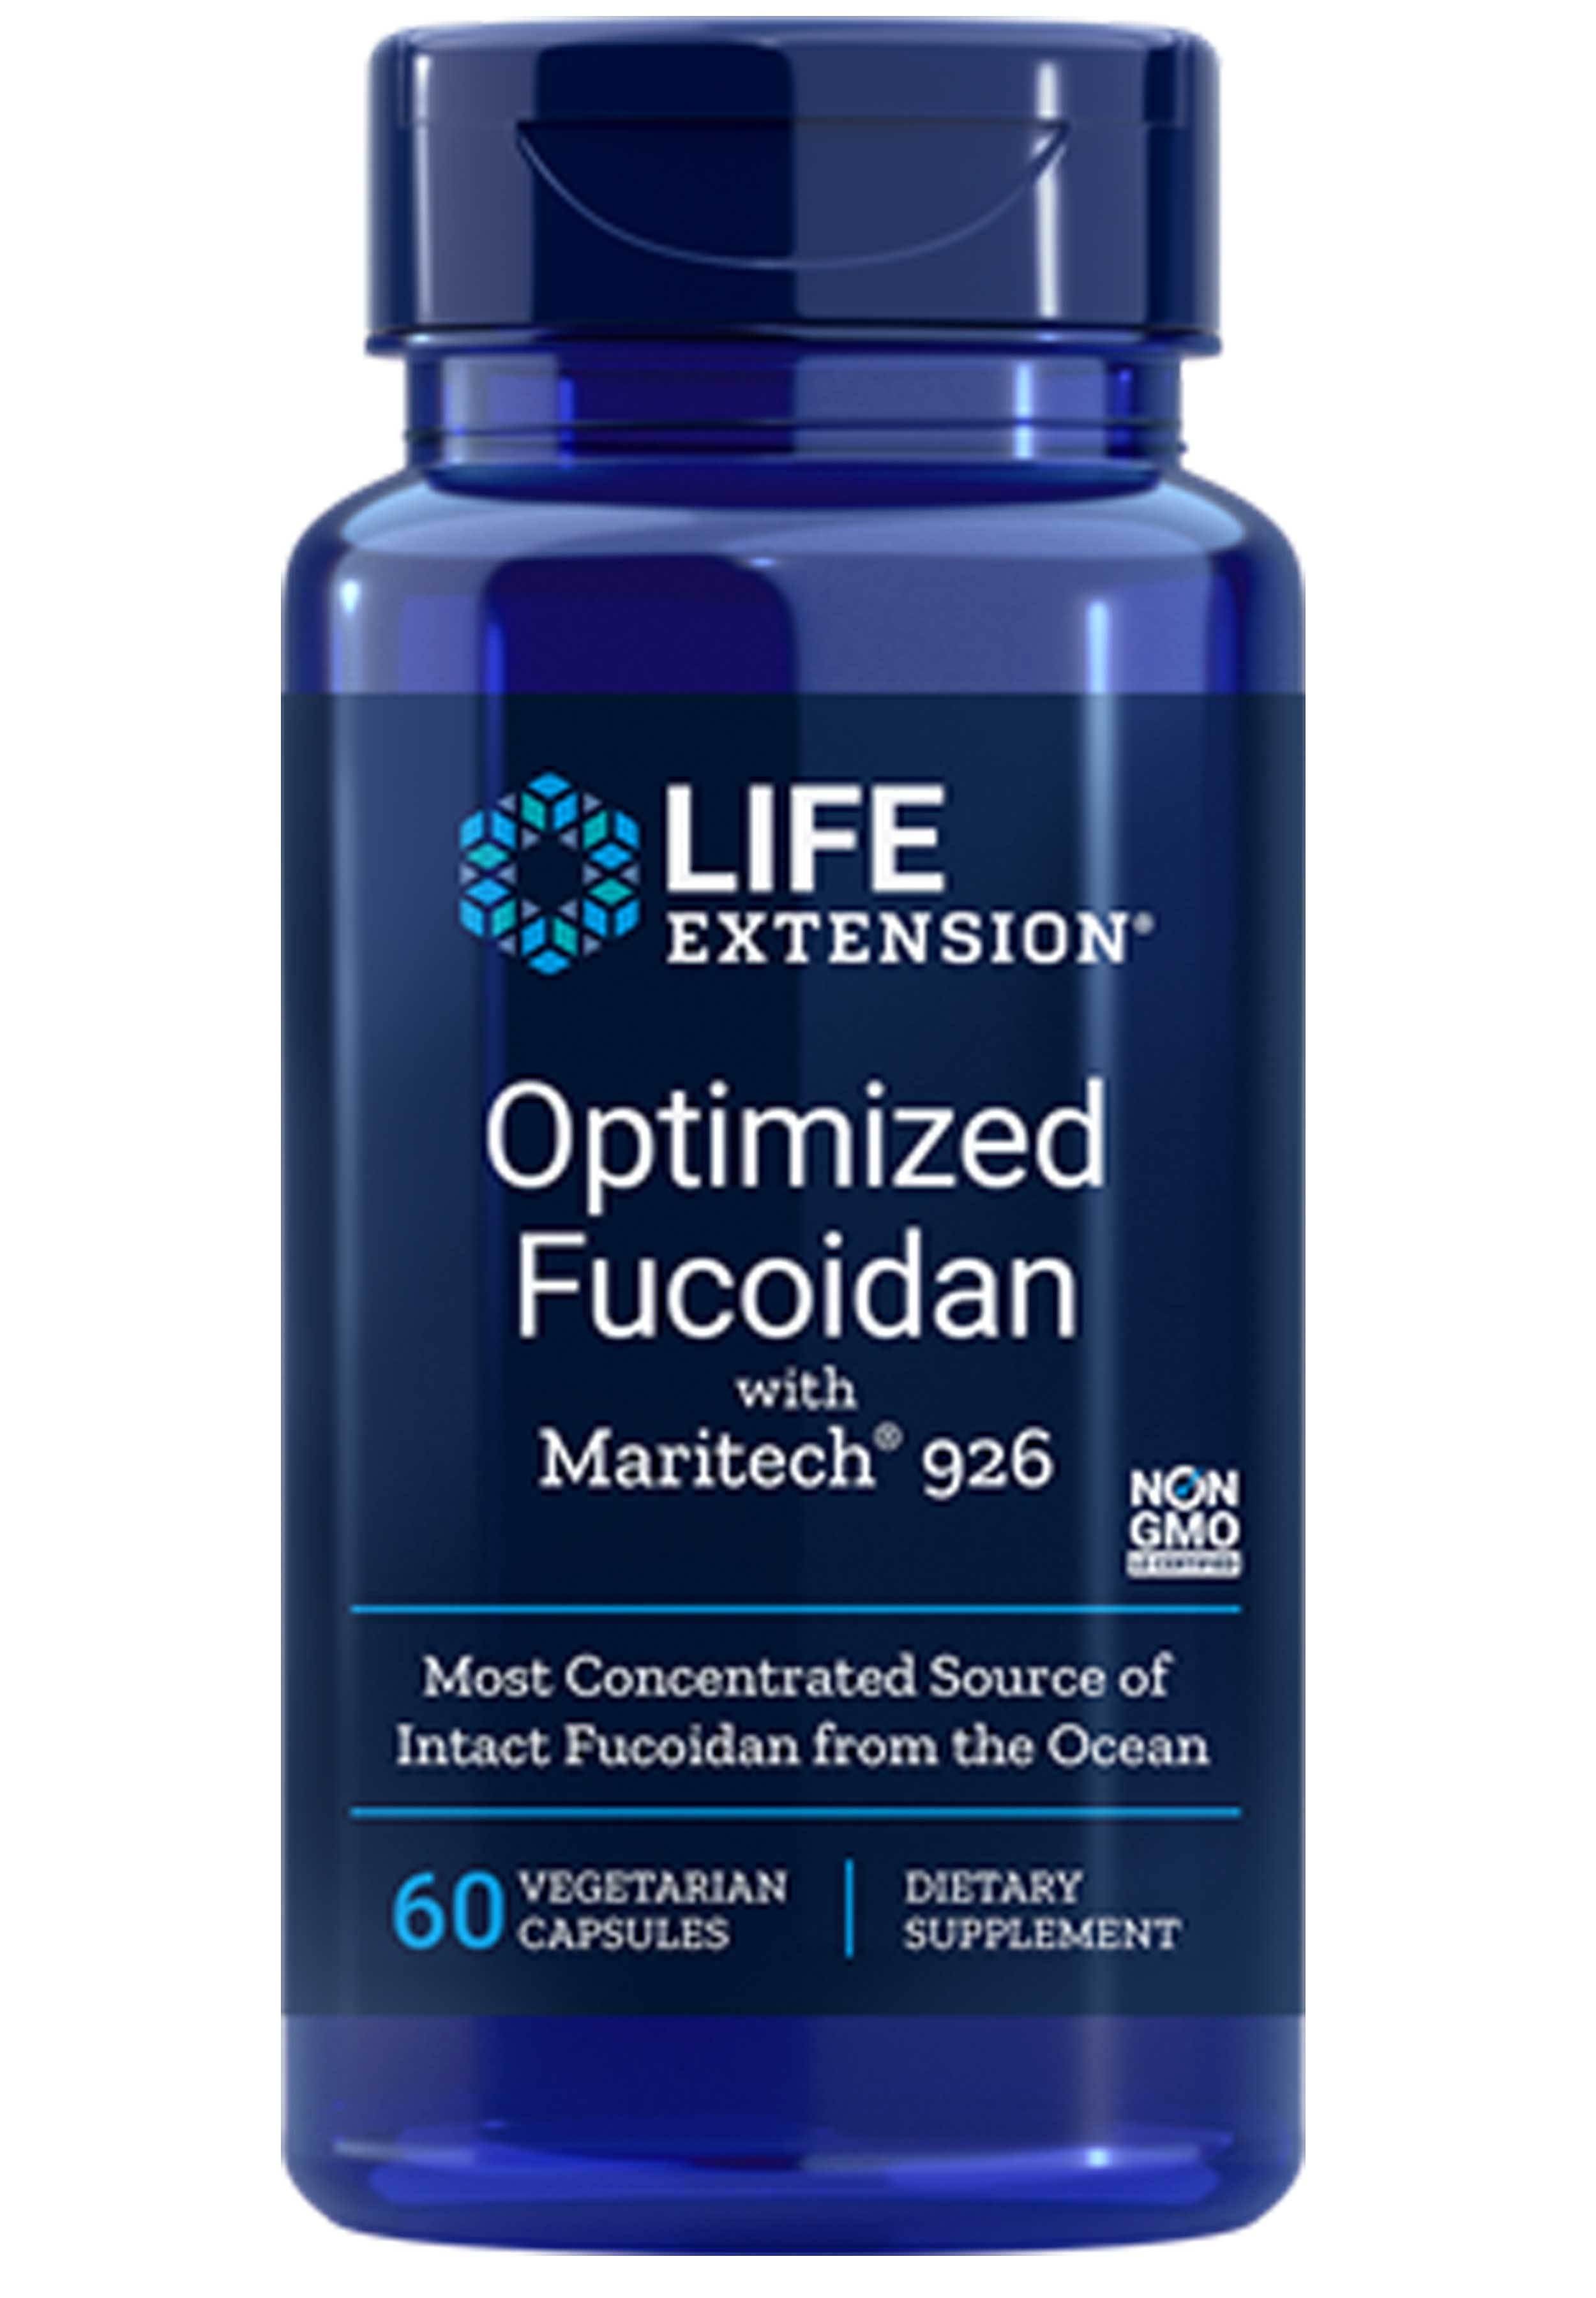 Life Extension Optimized Fucoidan with Maritech 926